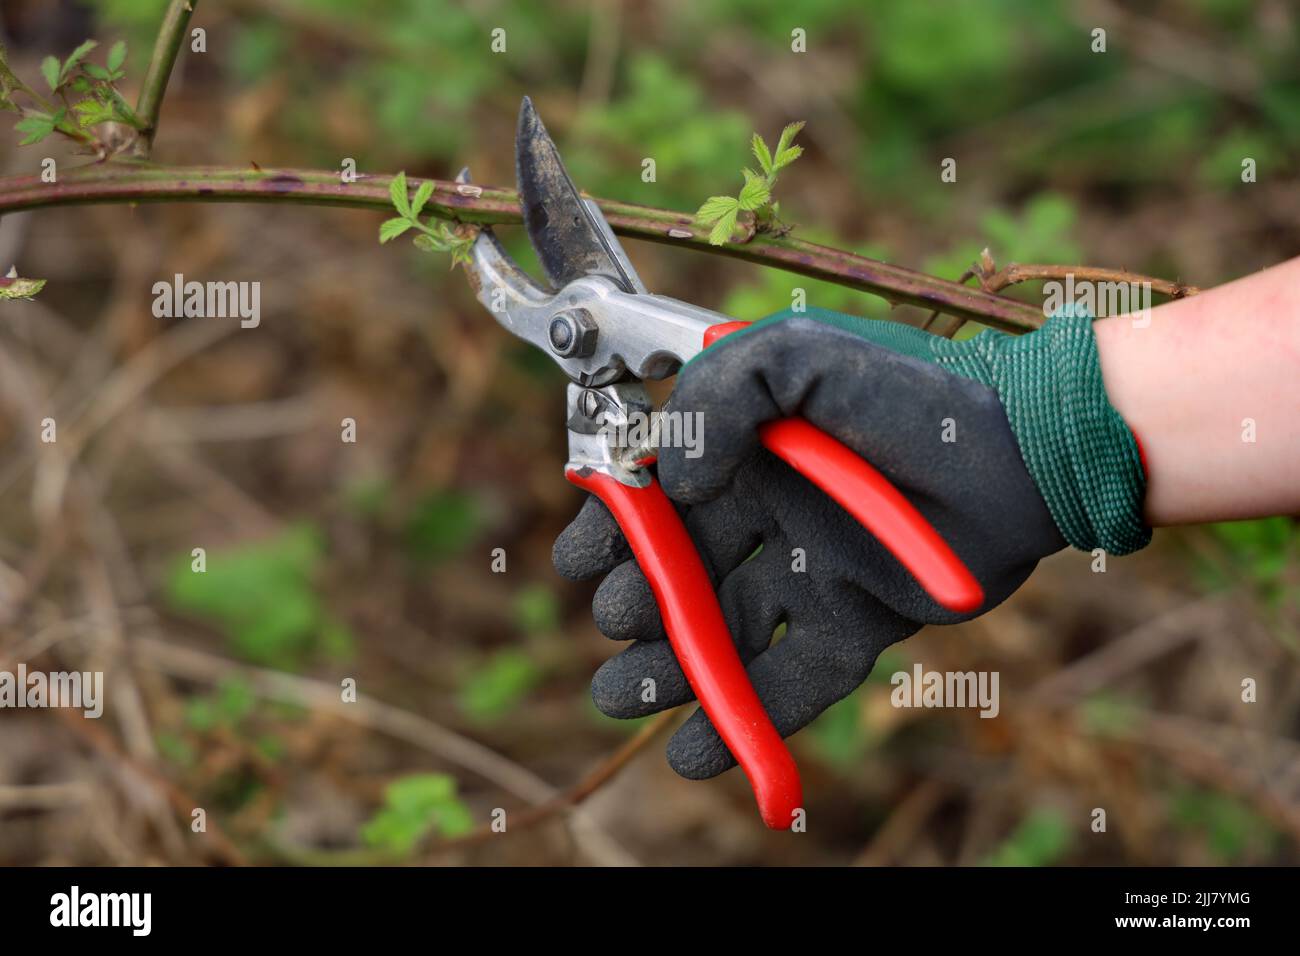 female hand in green gloves cuts thorn bush with red pruning shear Stock Photo